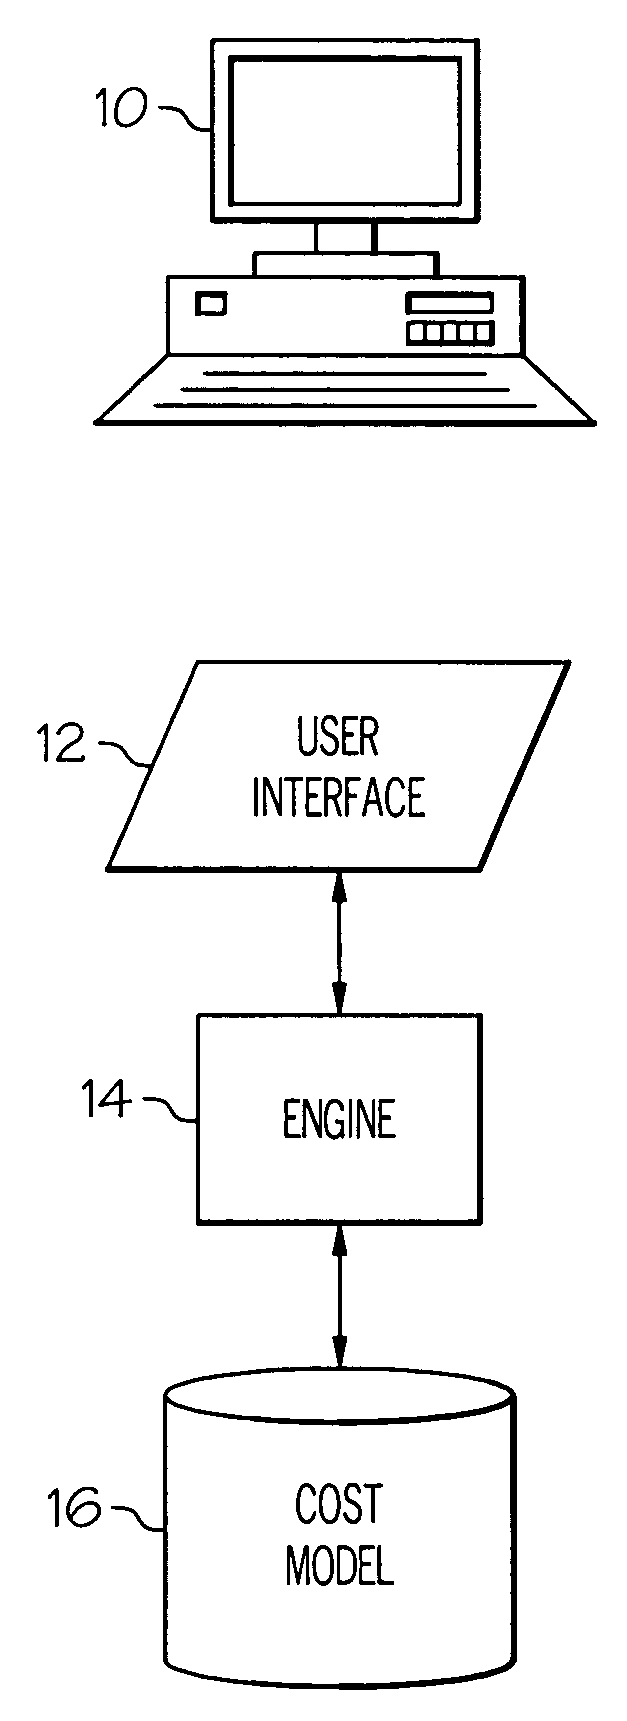 Method and system for estimating manufacturing costs